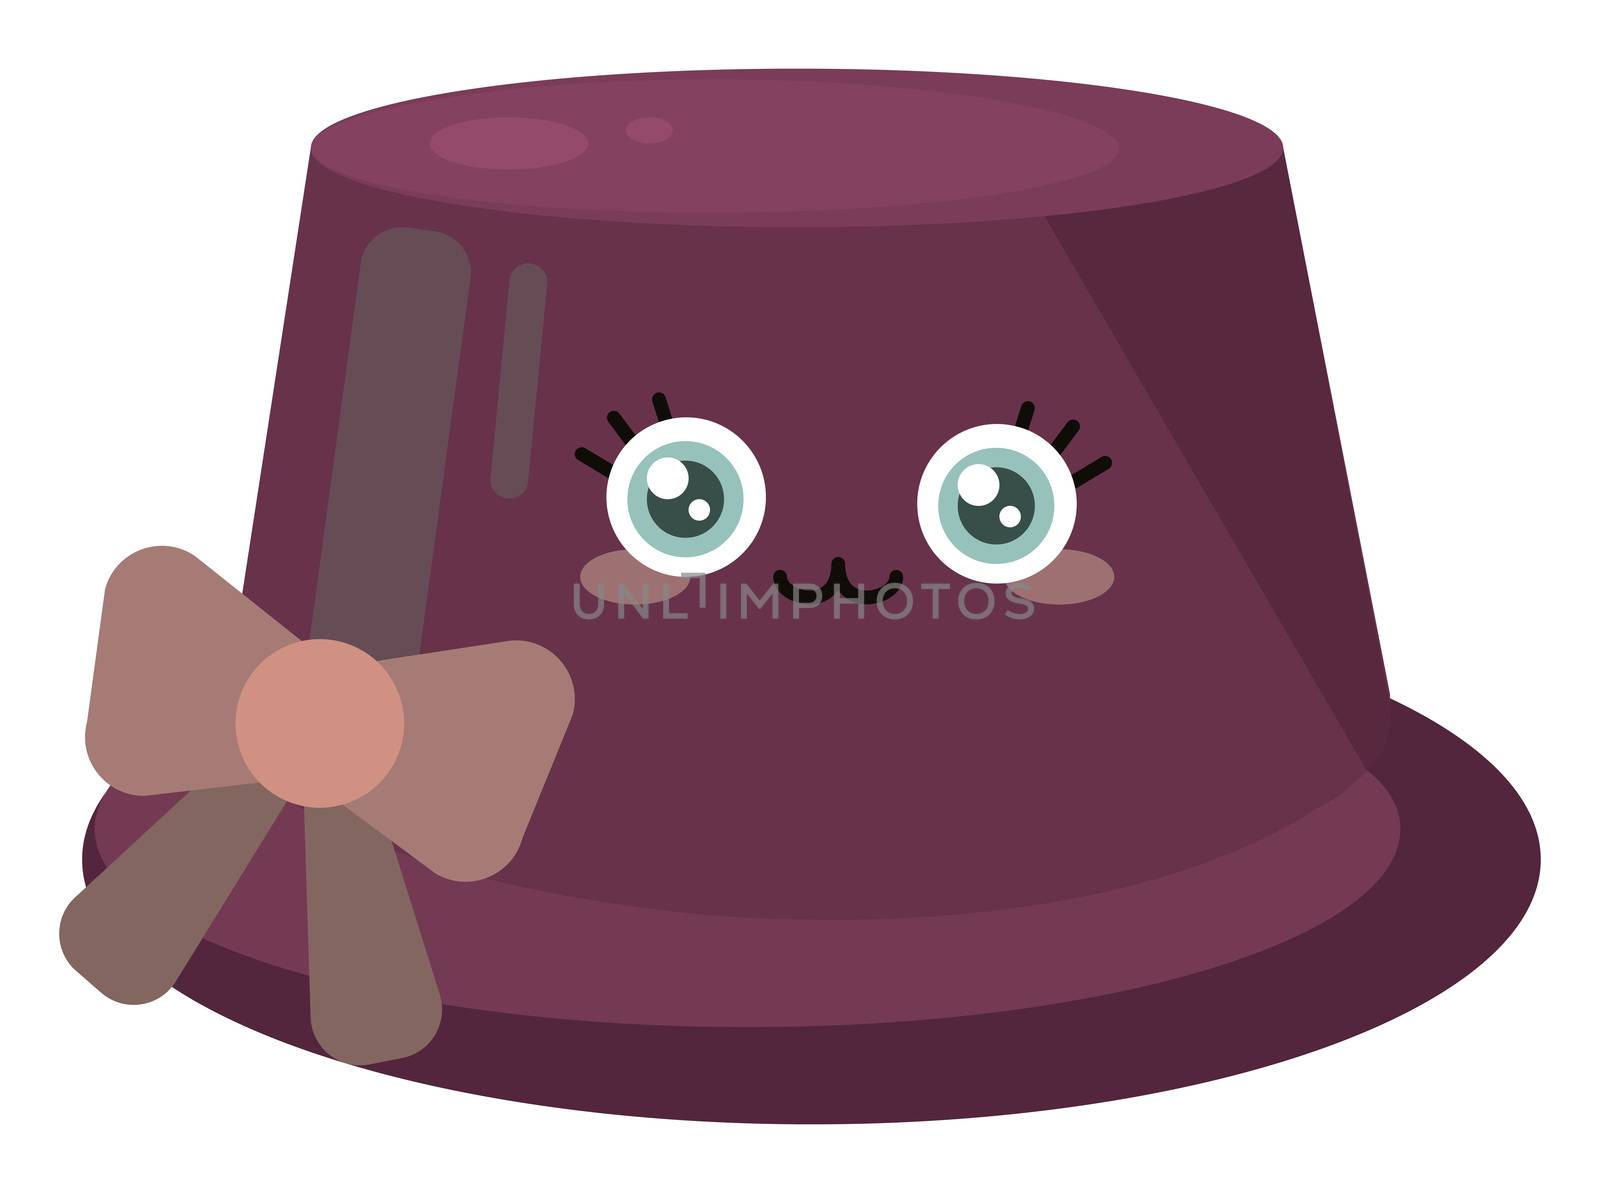 Cute purple hat , illustration, vector on white background